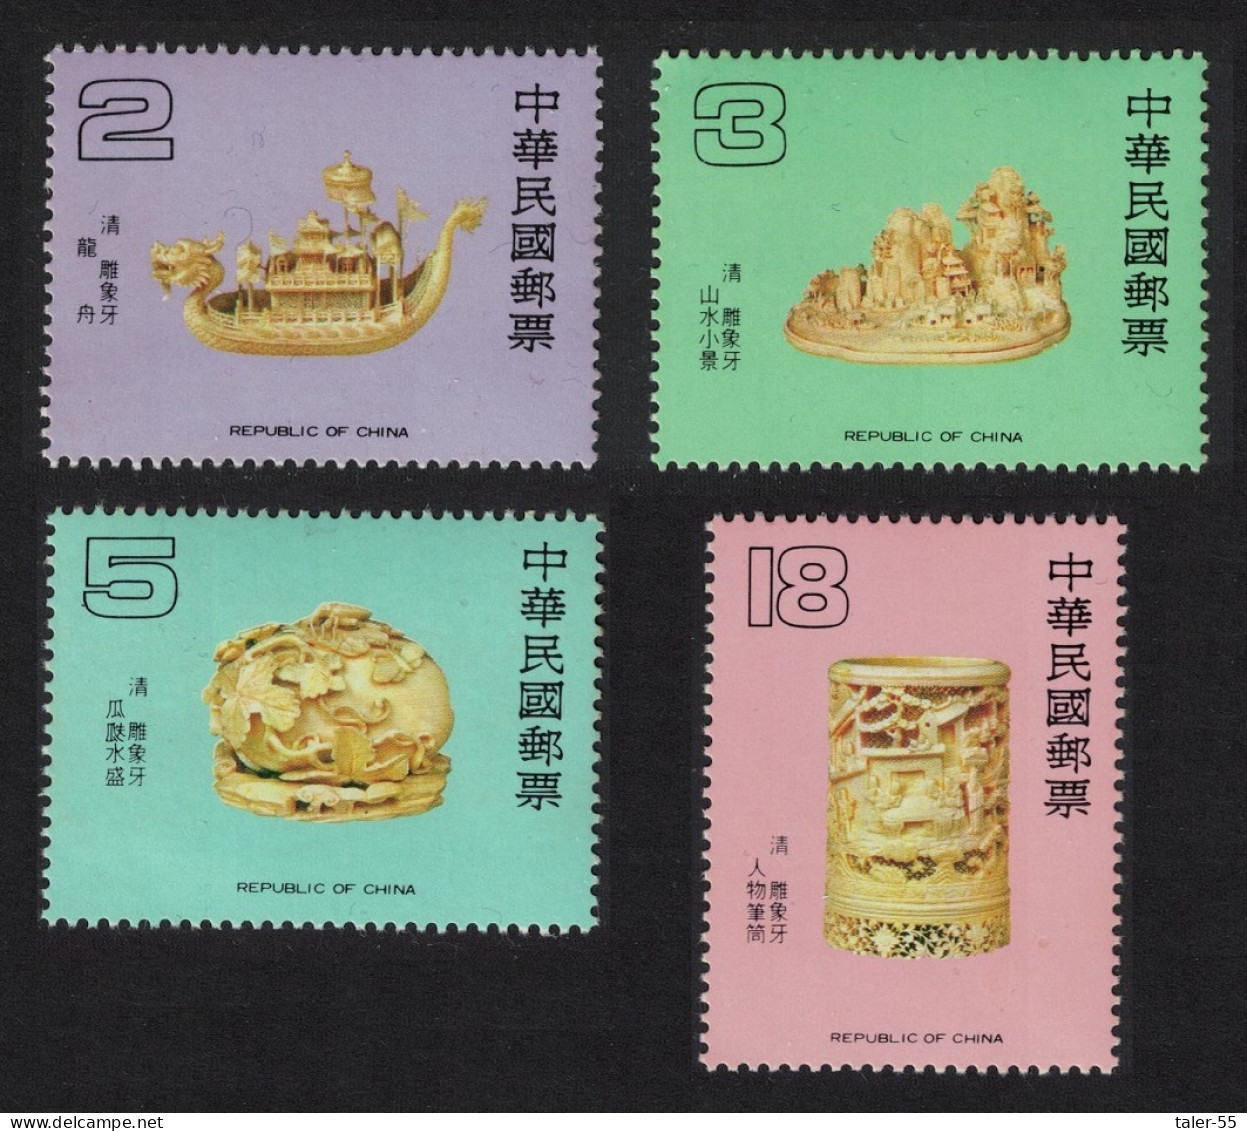 Taiwan Qing Dynasty Ivory Carvings 4v 1985 MNH SG#1602-1605 - Unused Stamps